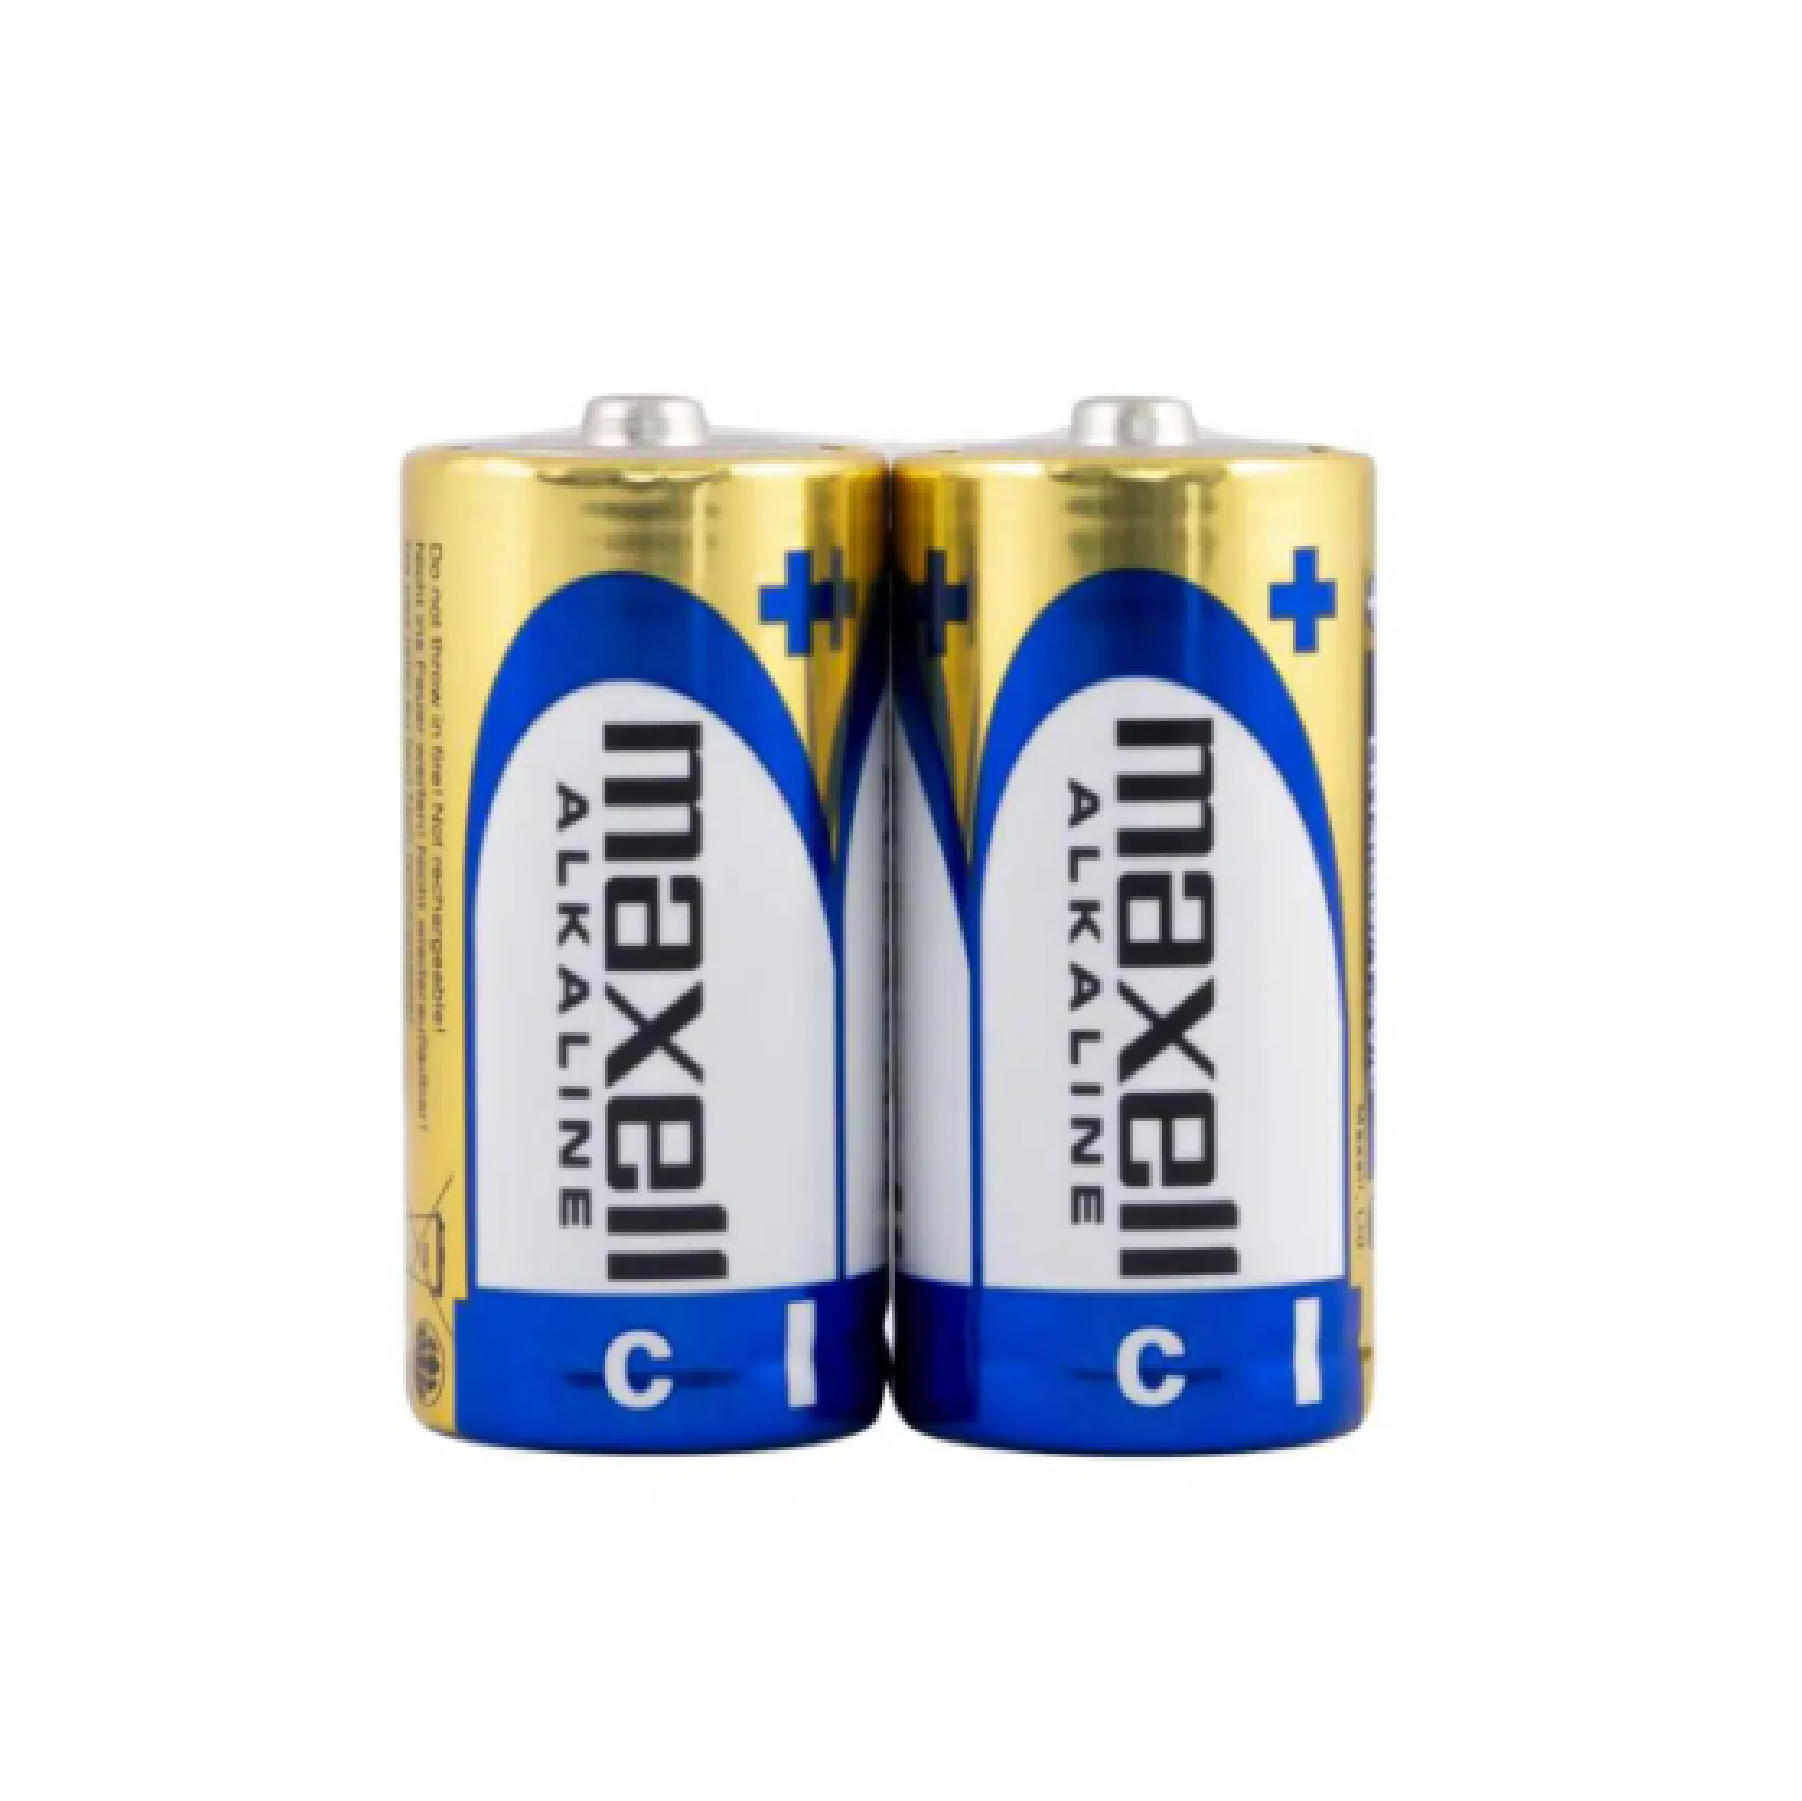 MAXELL C-SIZE Alkaline Battery Long Lasting 2PC/PACK